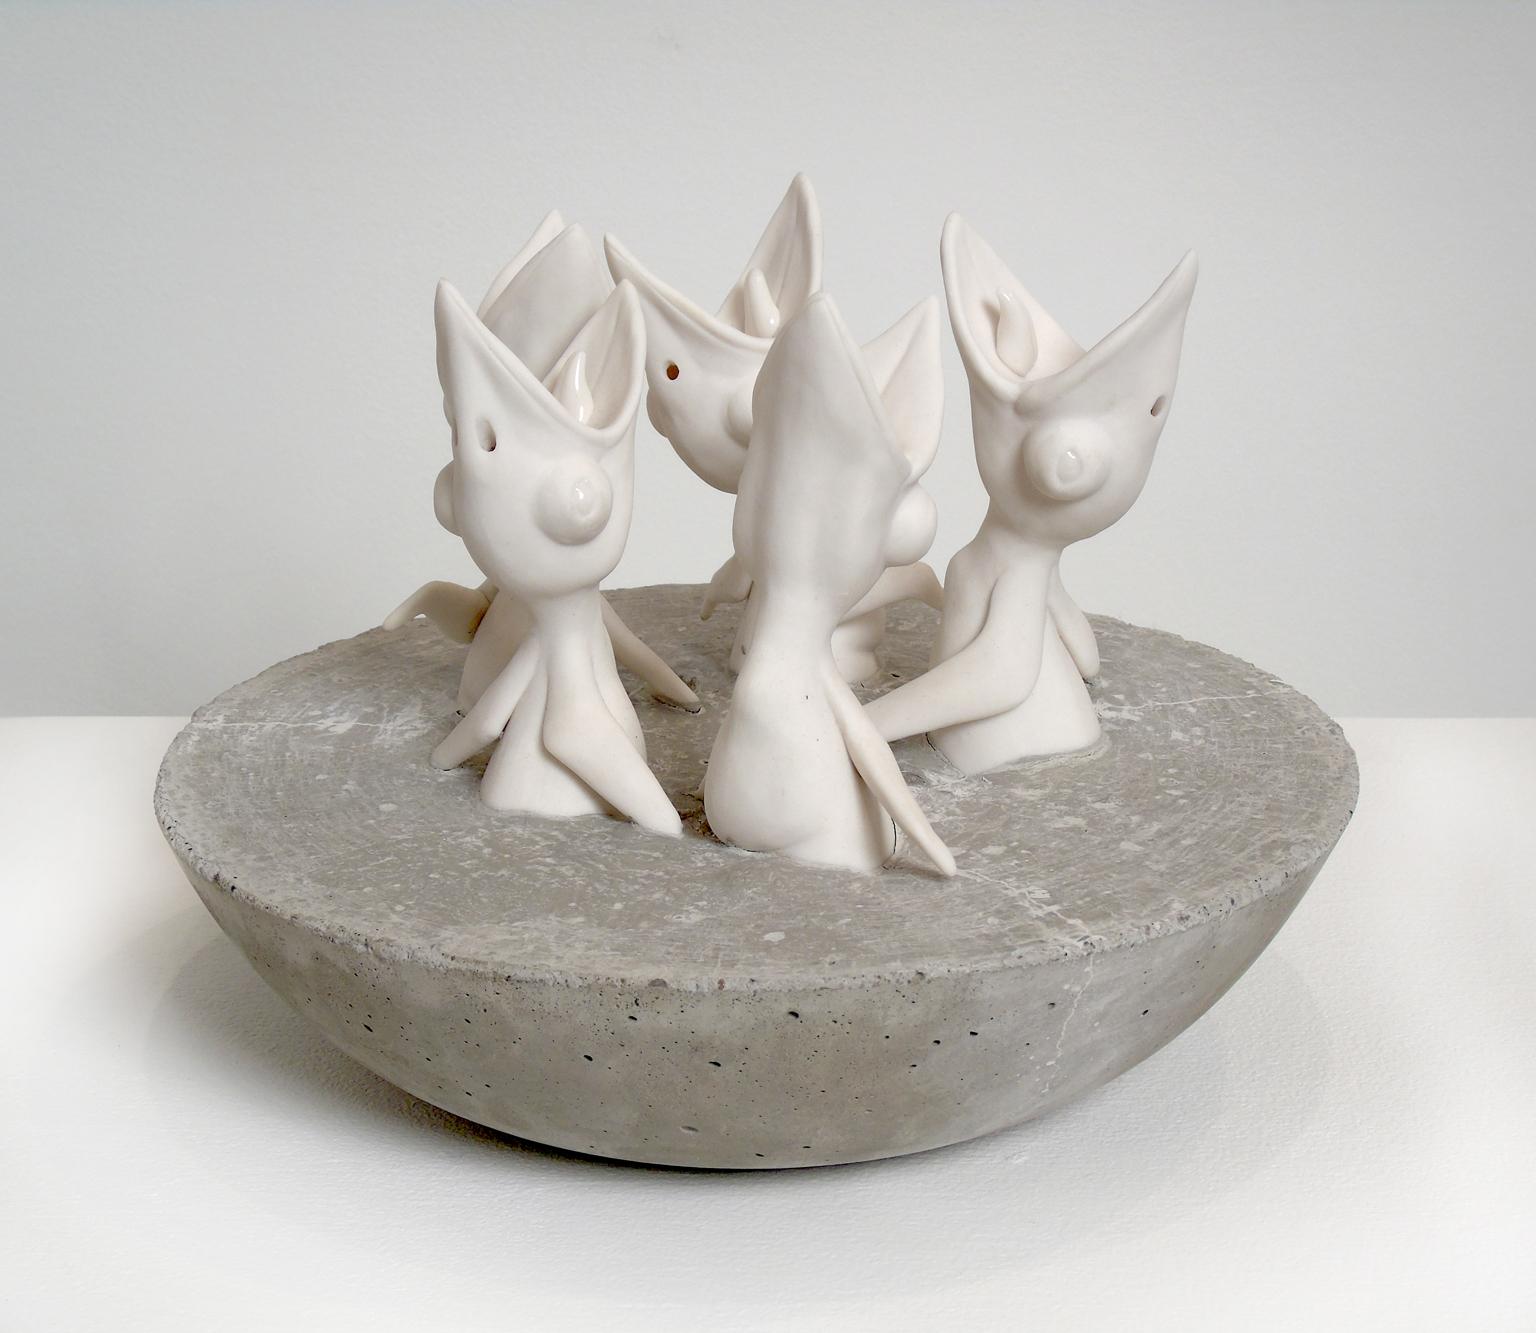 "Five Hungry Birds" by Bethany Krull shows five baby birds, mouths agape and reaching up from a concrete base. Krull's presents her porcelain creatures in absurd and tense scenarios. Such is the case with "Five Hungry Birds". The chicks are bare and